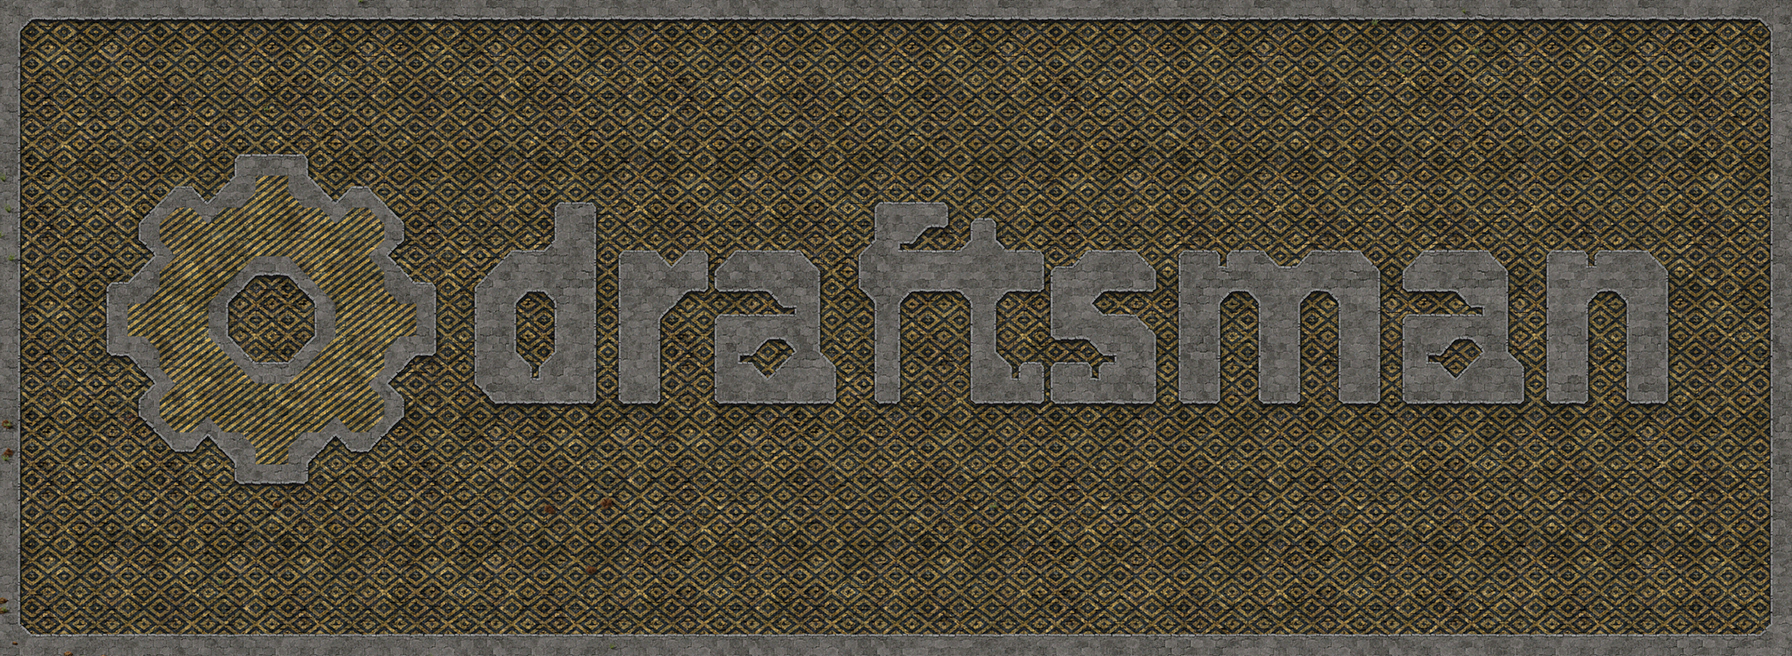 The Draftsman logo created by an example script.